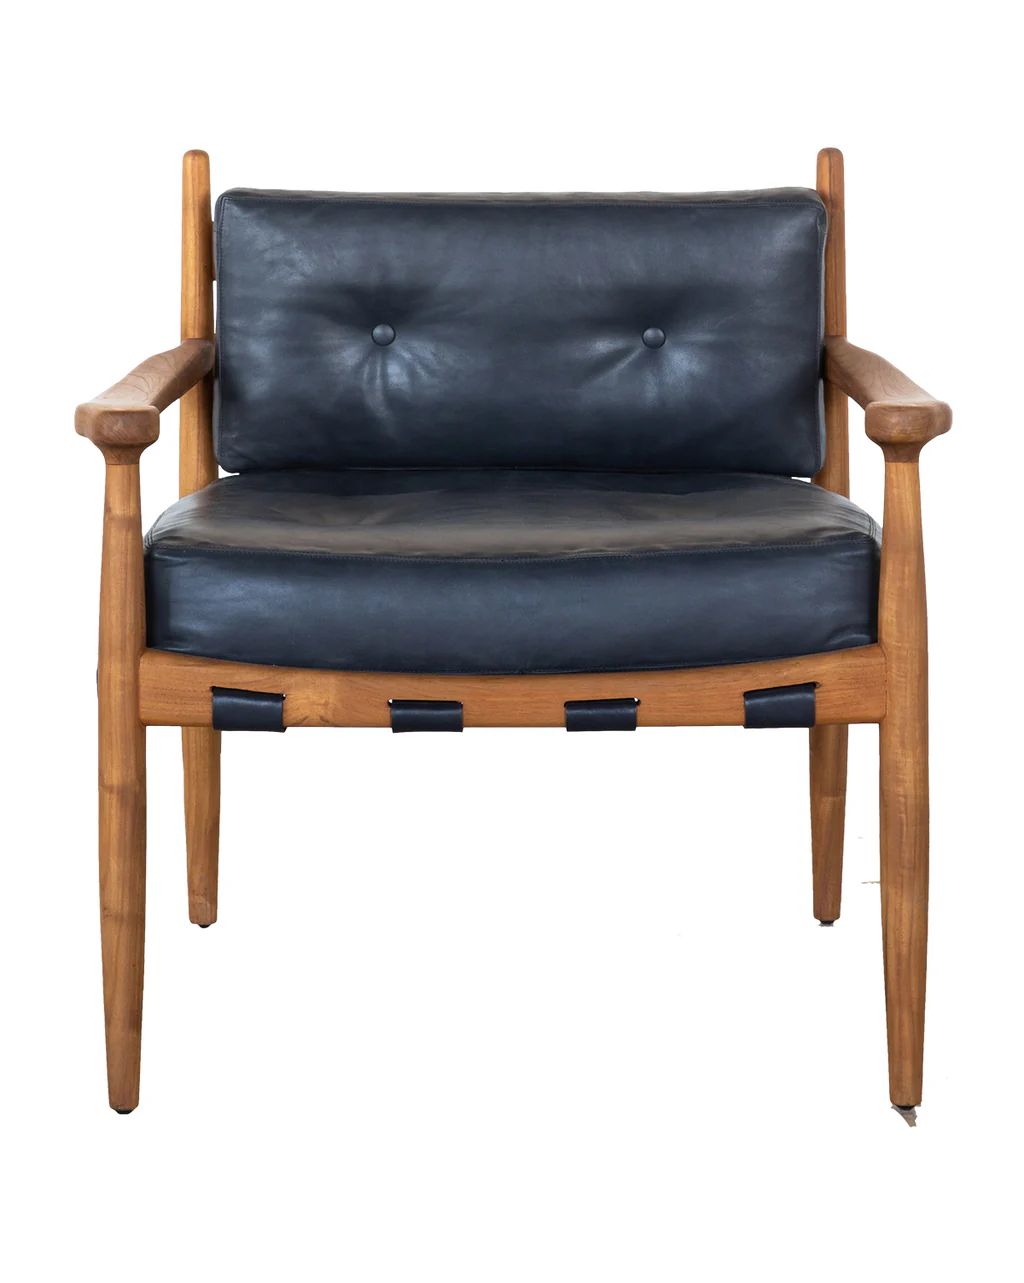 Forrest Leather Chair | McGee & Co.